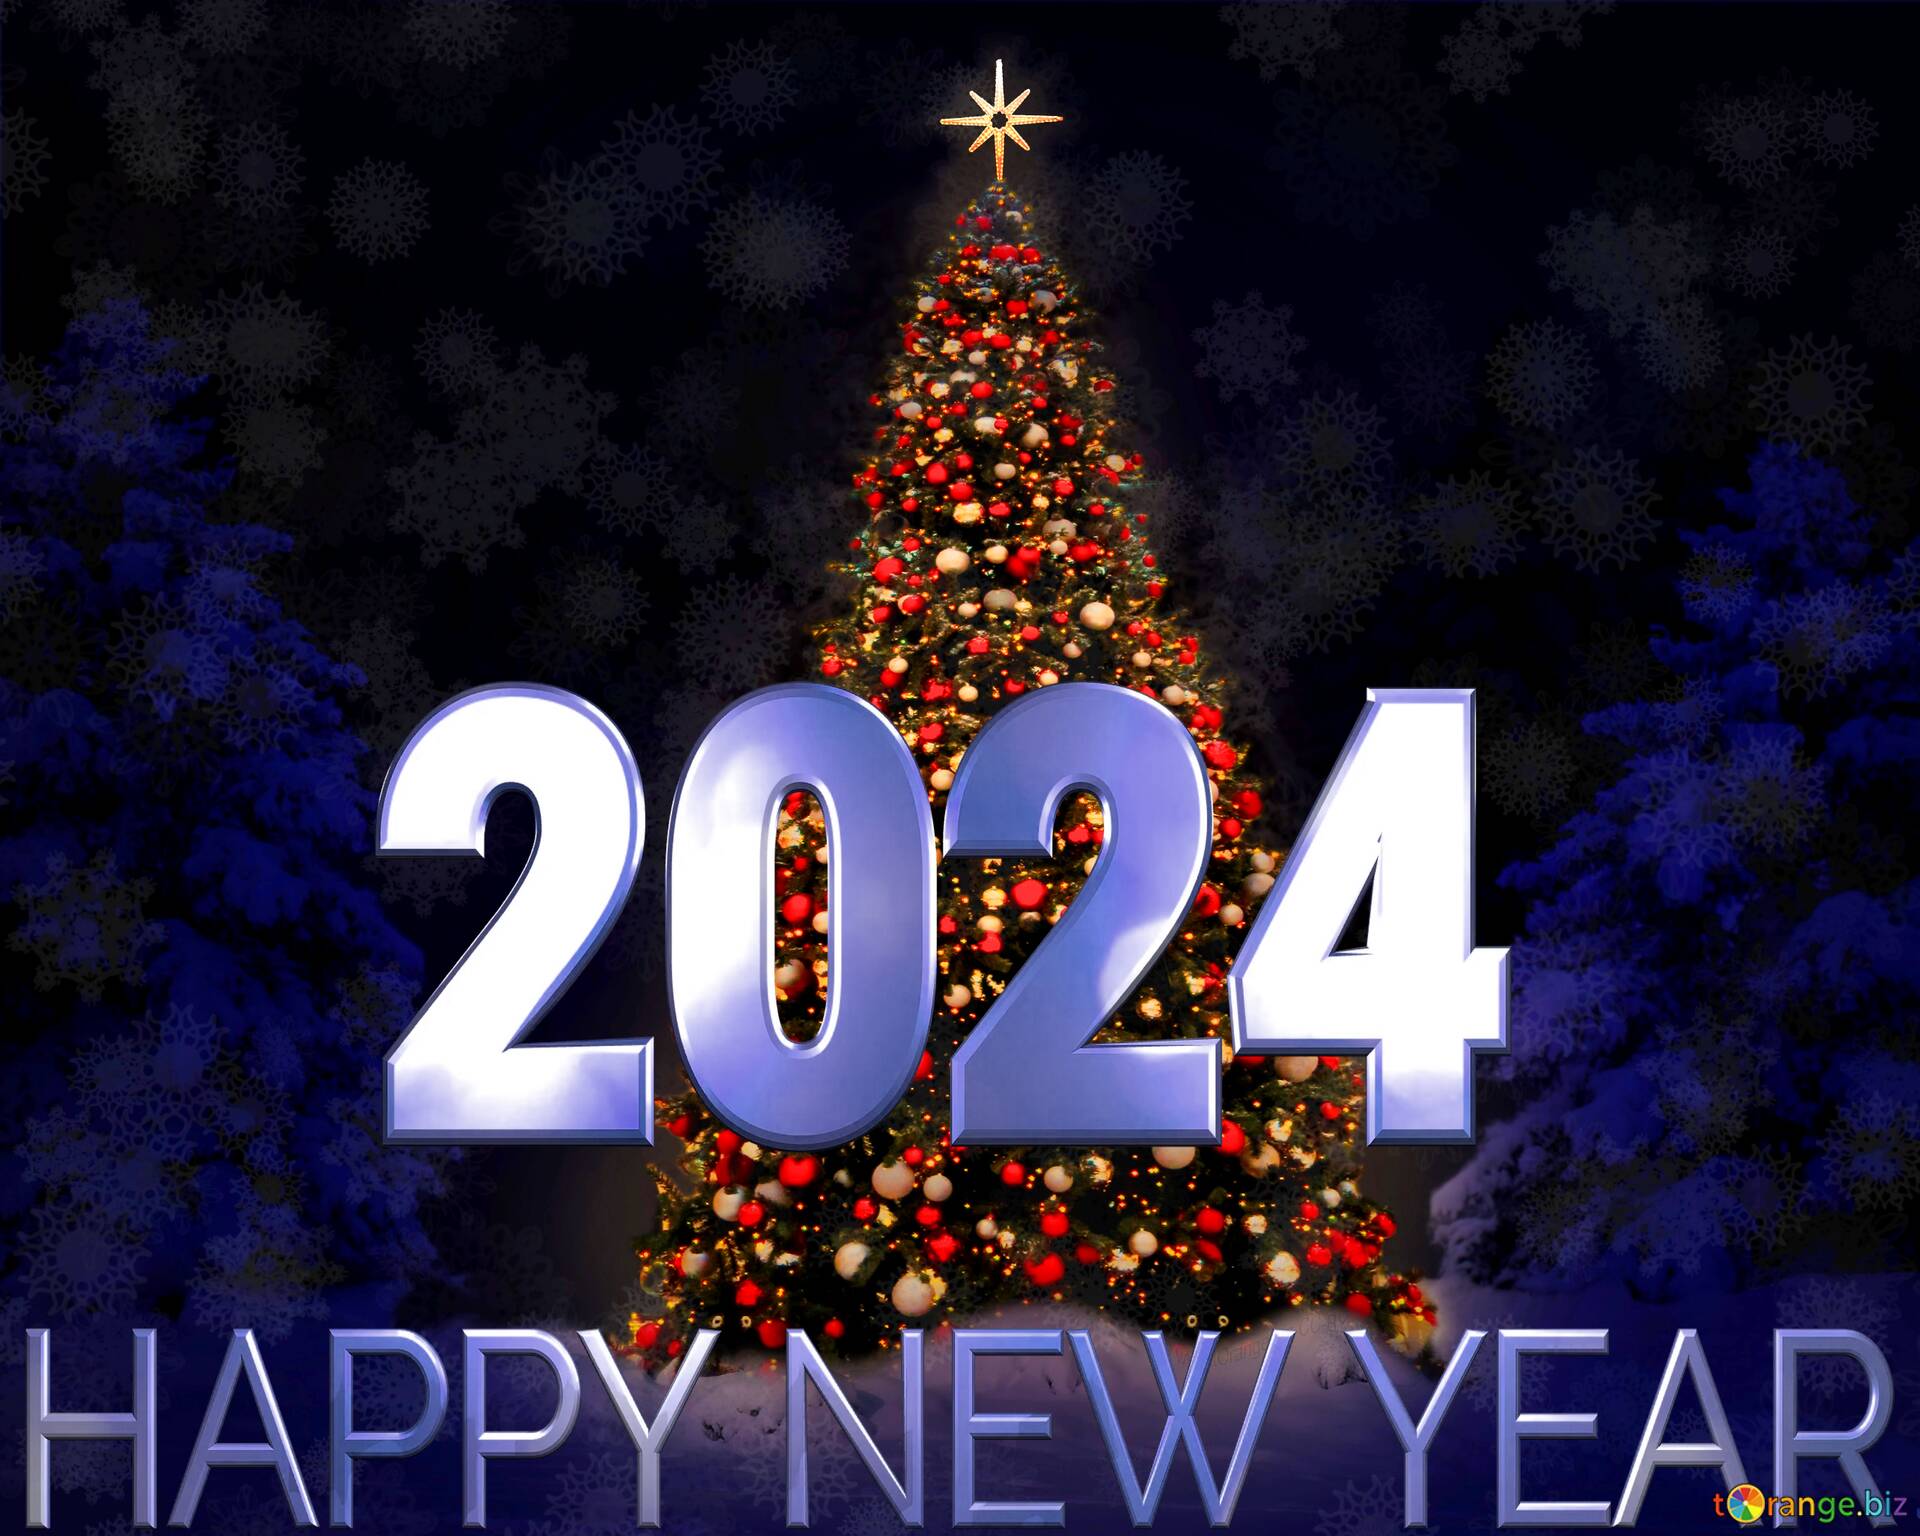 Download free picture Christmas tree happy new year 2022 blue on CC-BY  License ~ Free Image Stock tOrange.biz ~ fx №216474